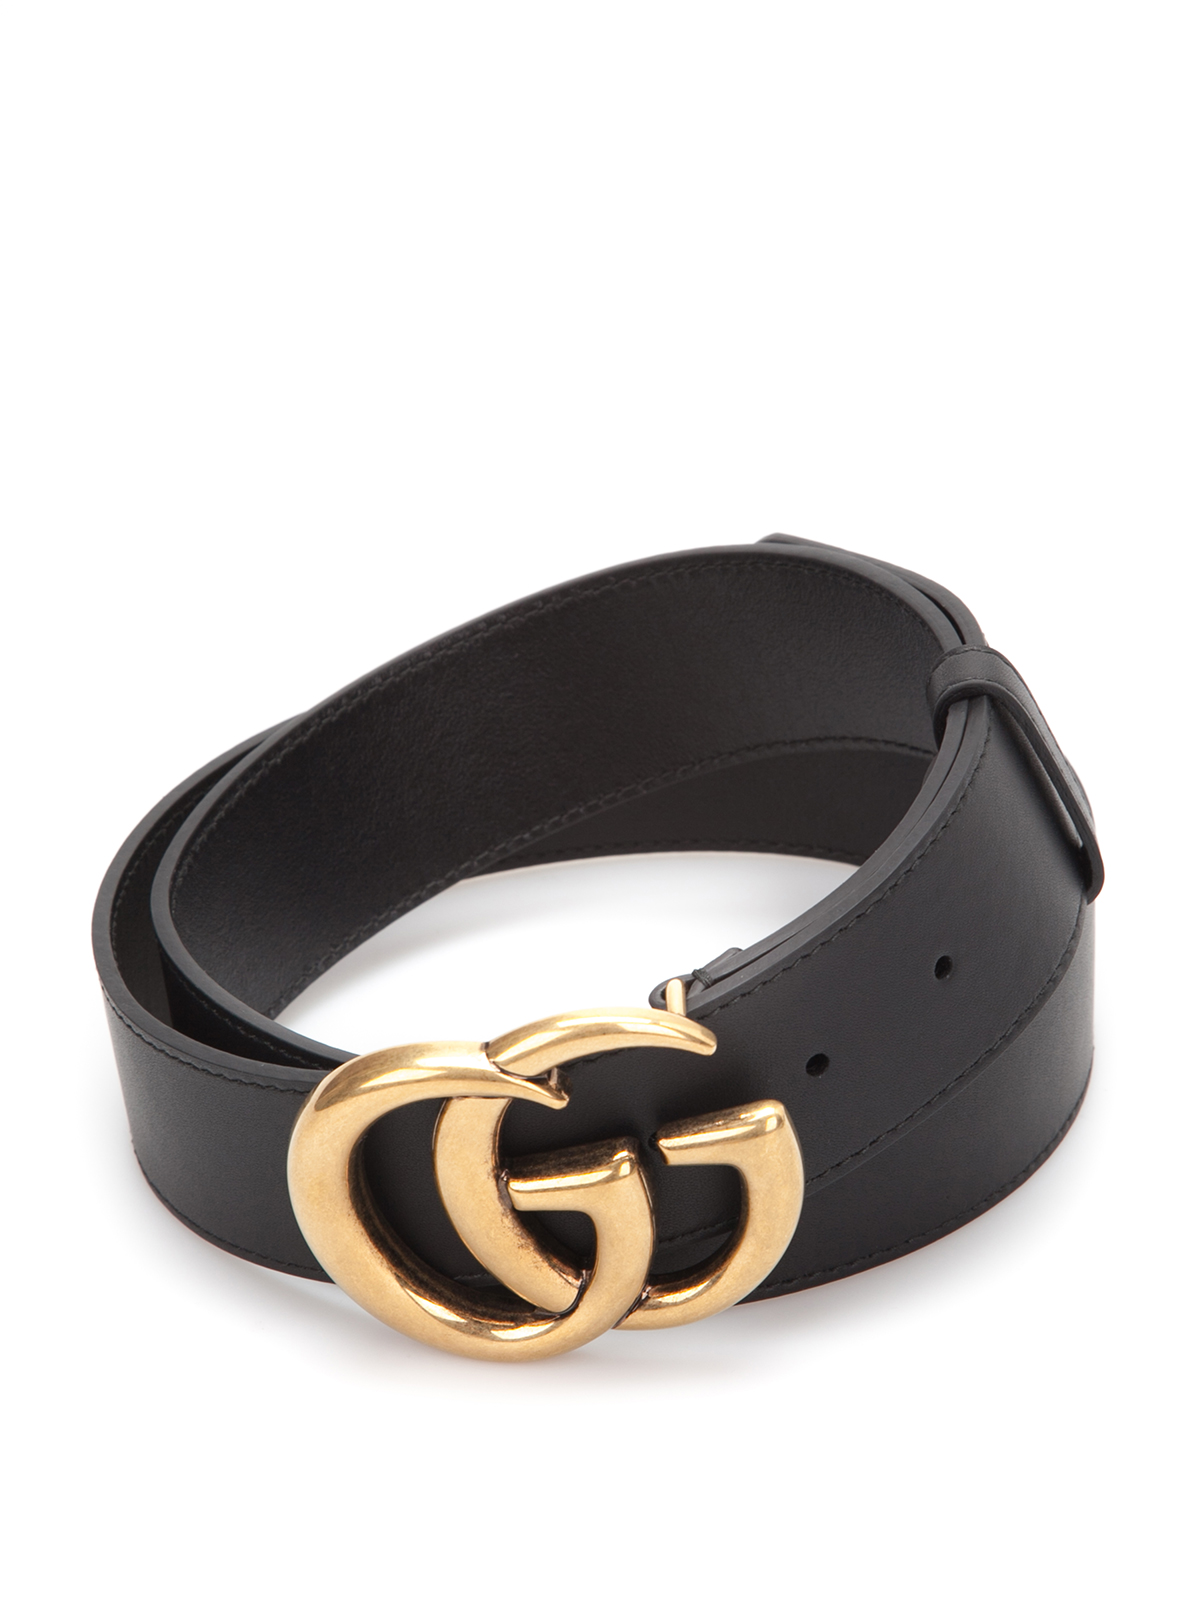 Leather belt with double G buckle 